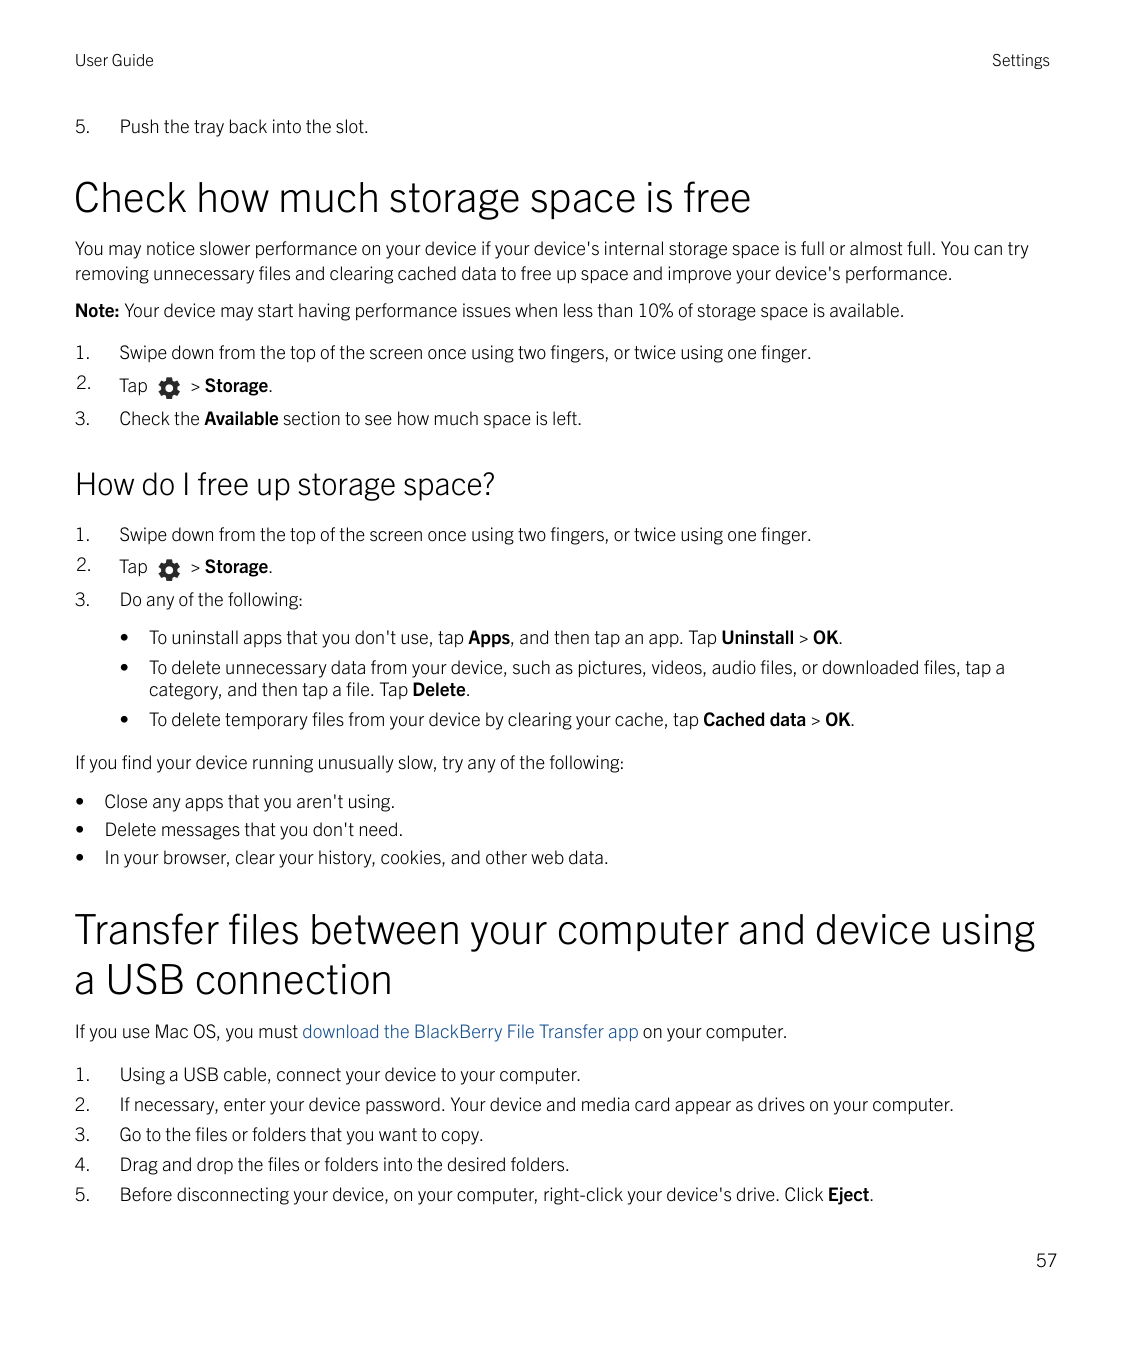 User Guide5.SettingsPush the tray back into the slot.Check how much storage space is freeYou may notice slower performance on yo